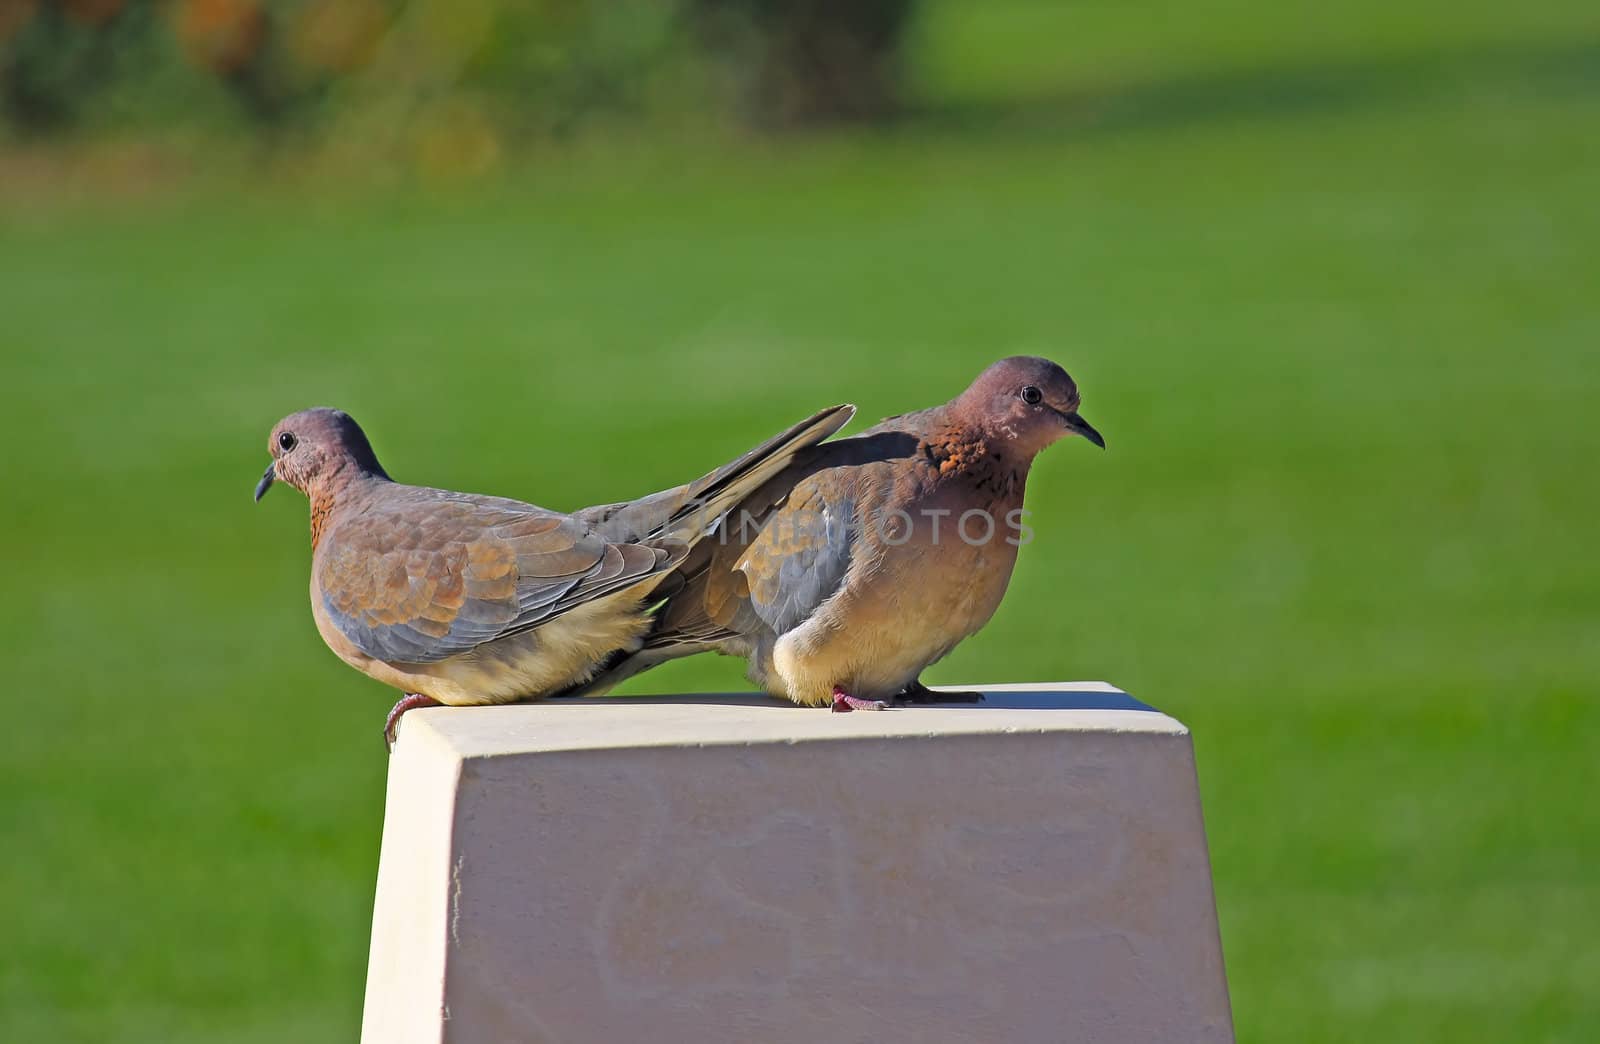 Two birds are sitting on a rock against a background of green grass.